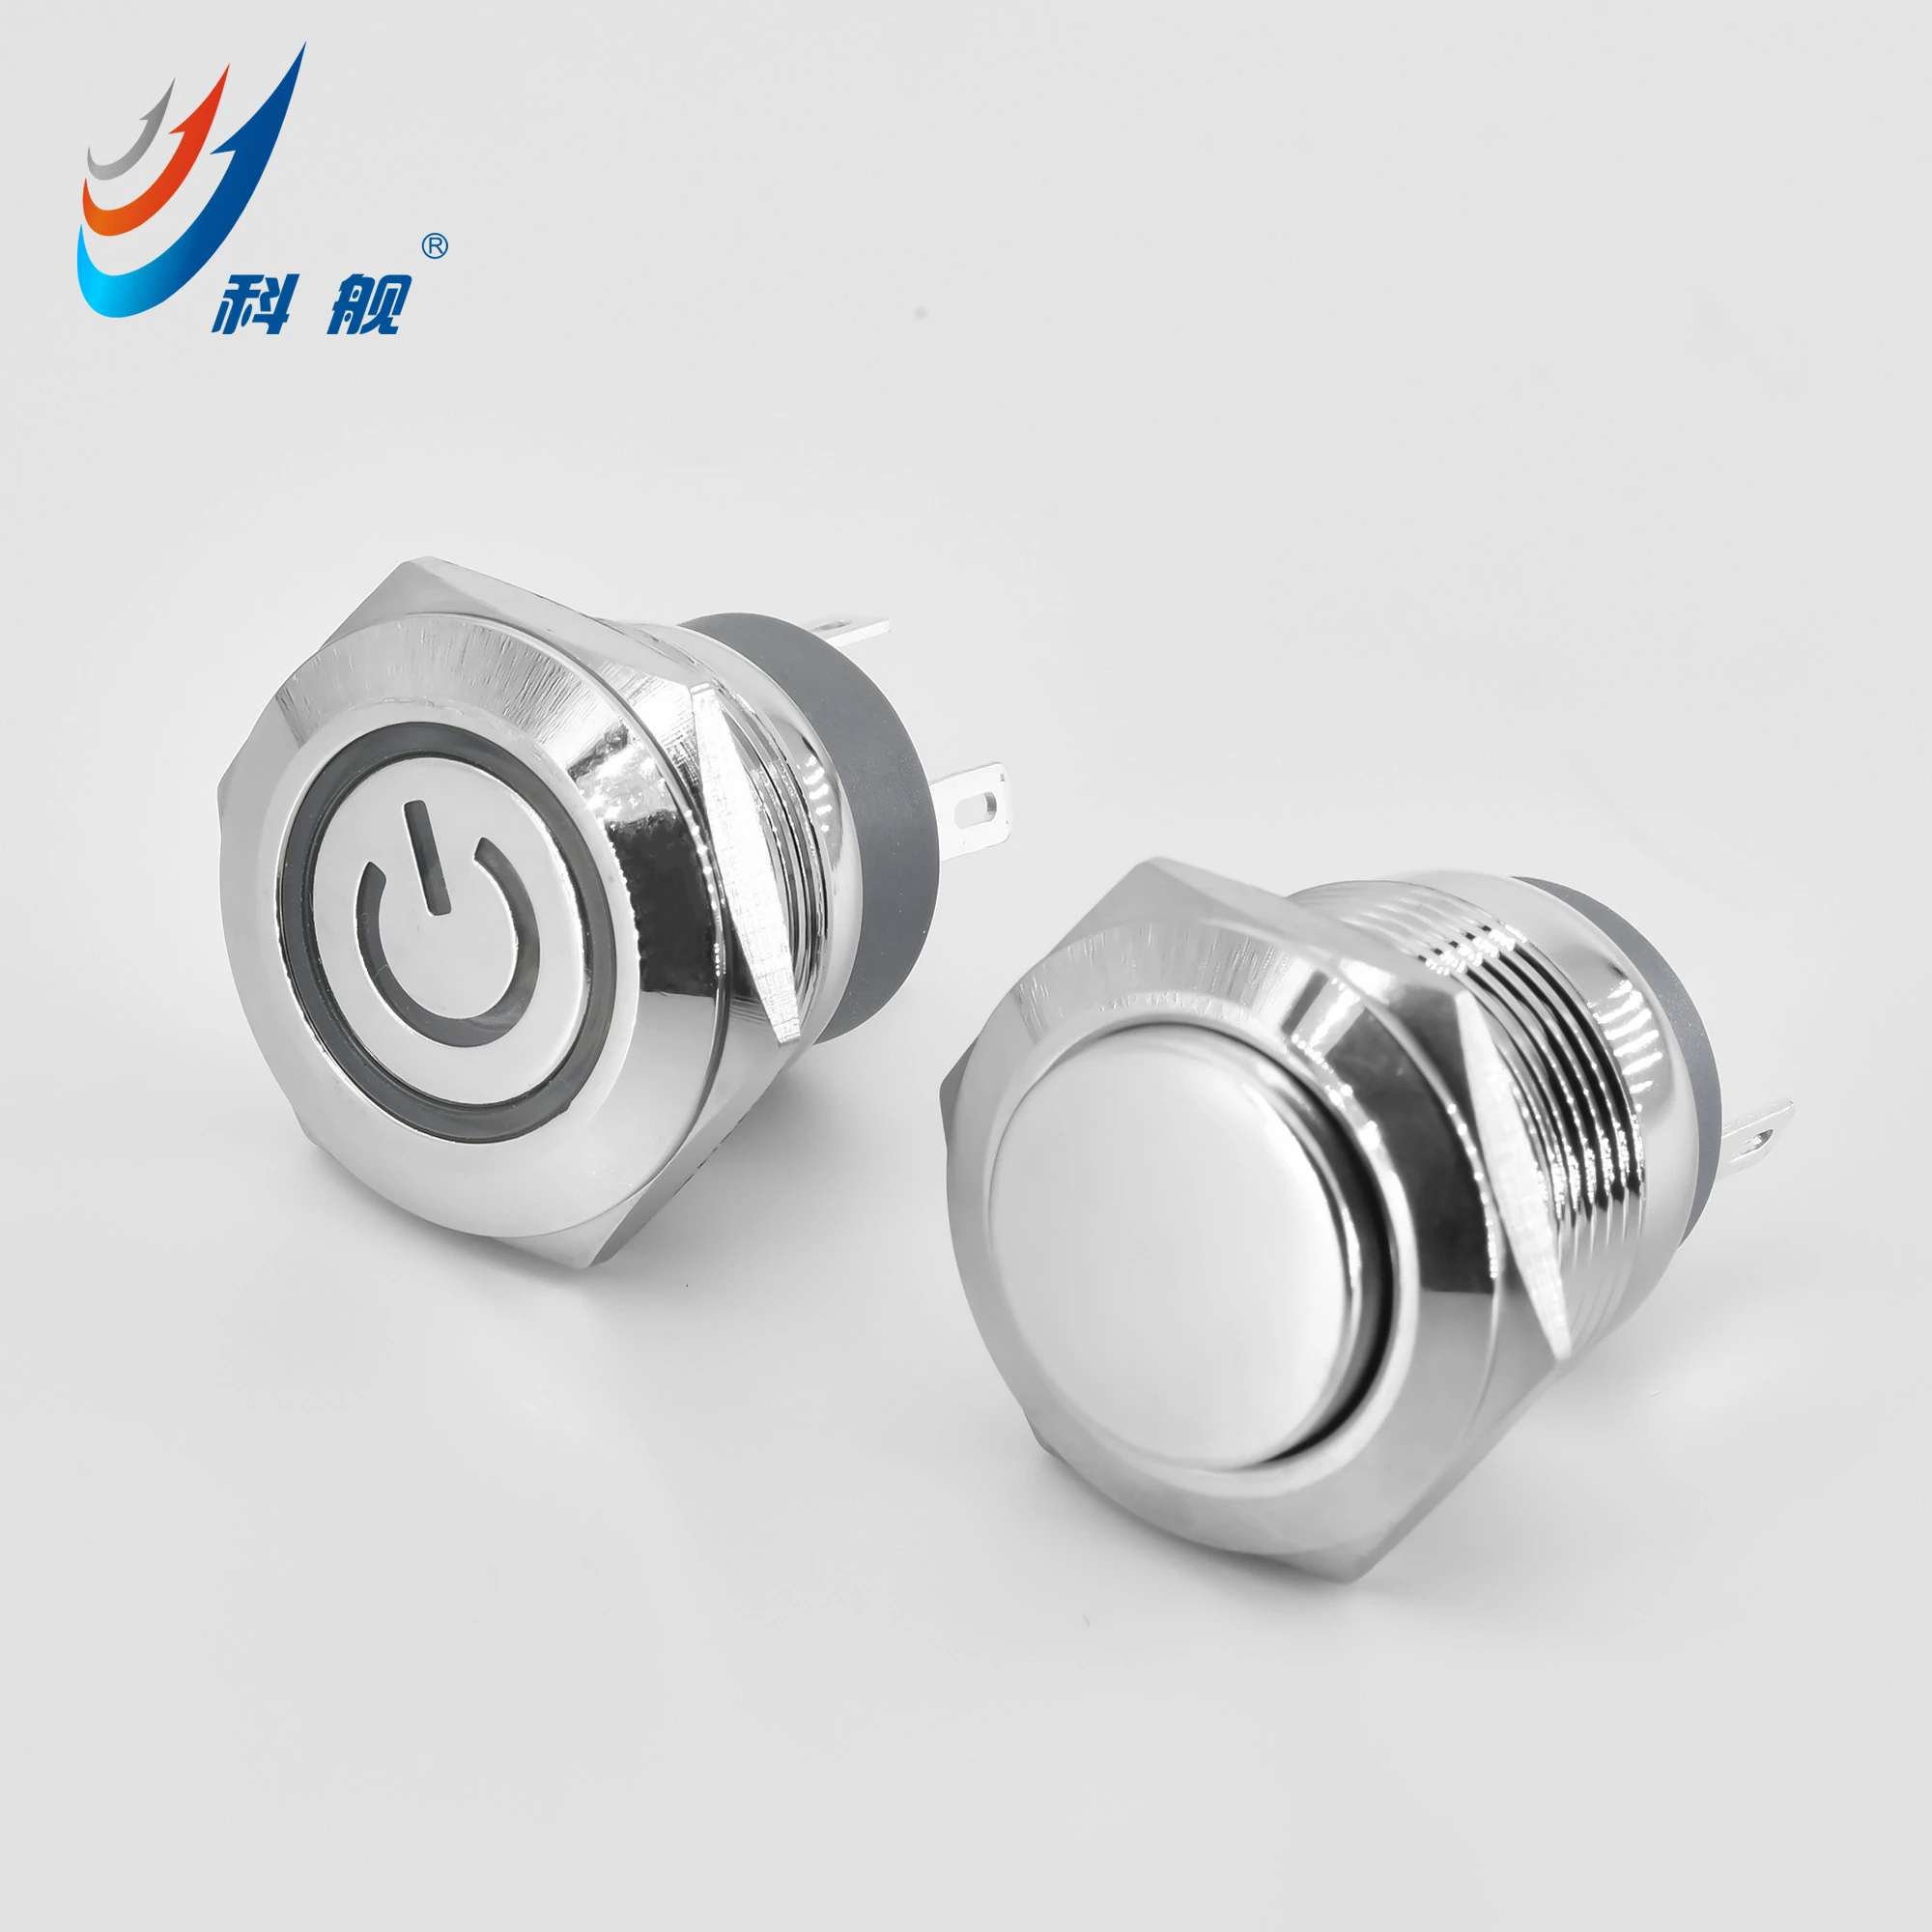 19mm waterproof metal push button switch momentary with LED /light push button switch ring